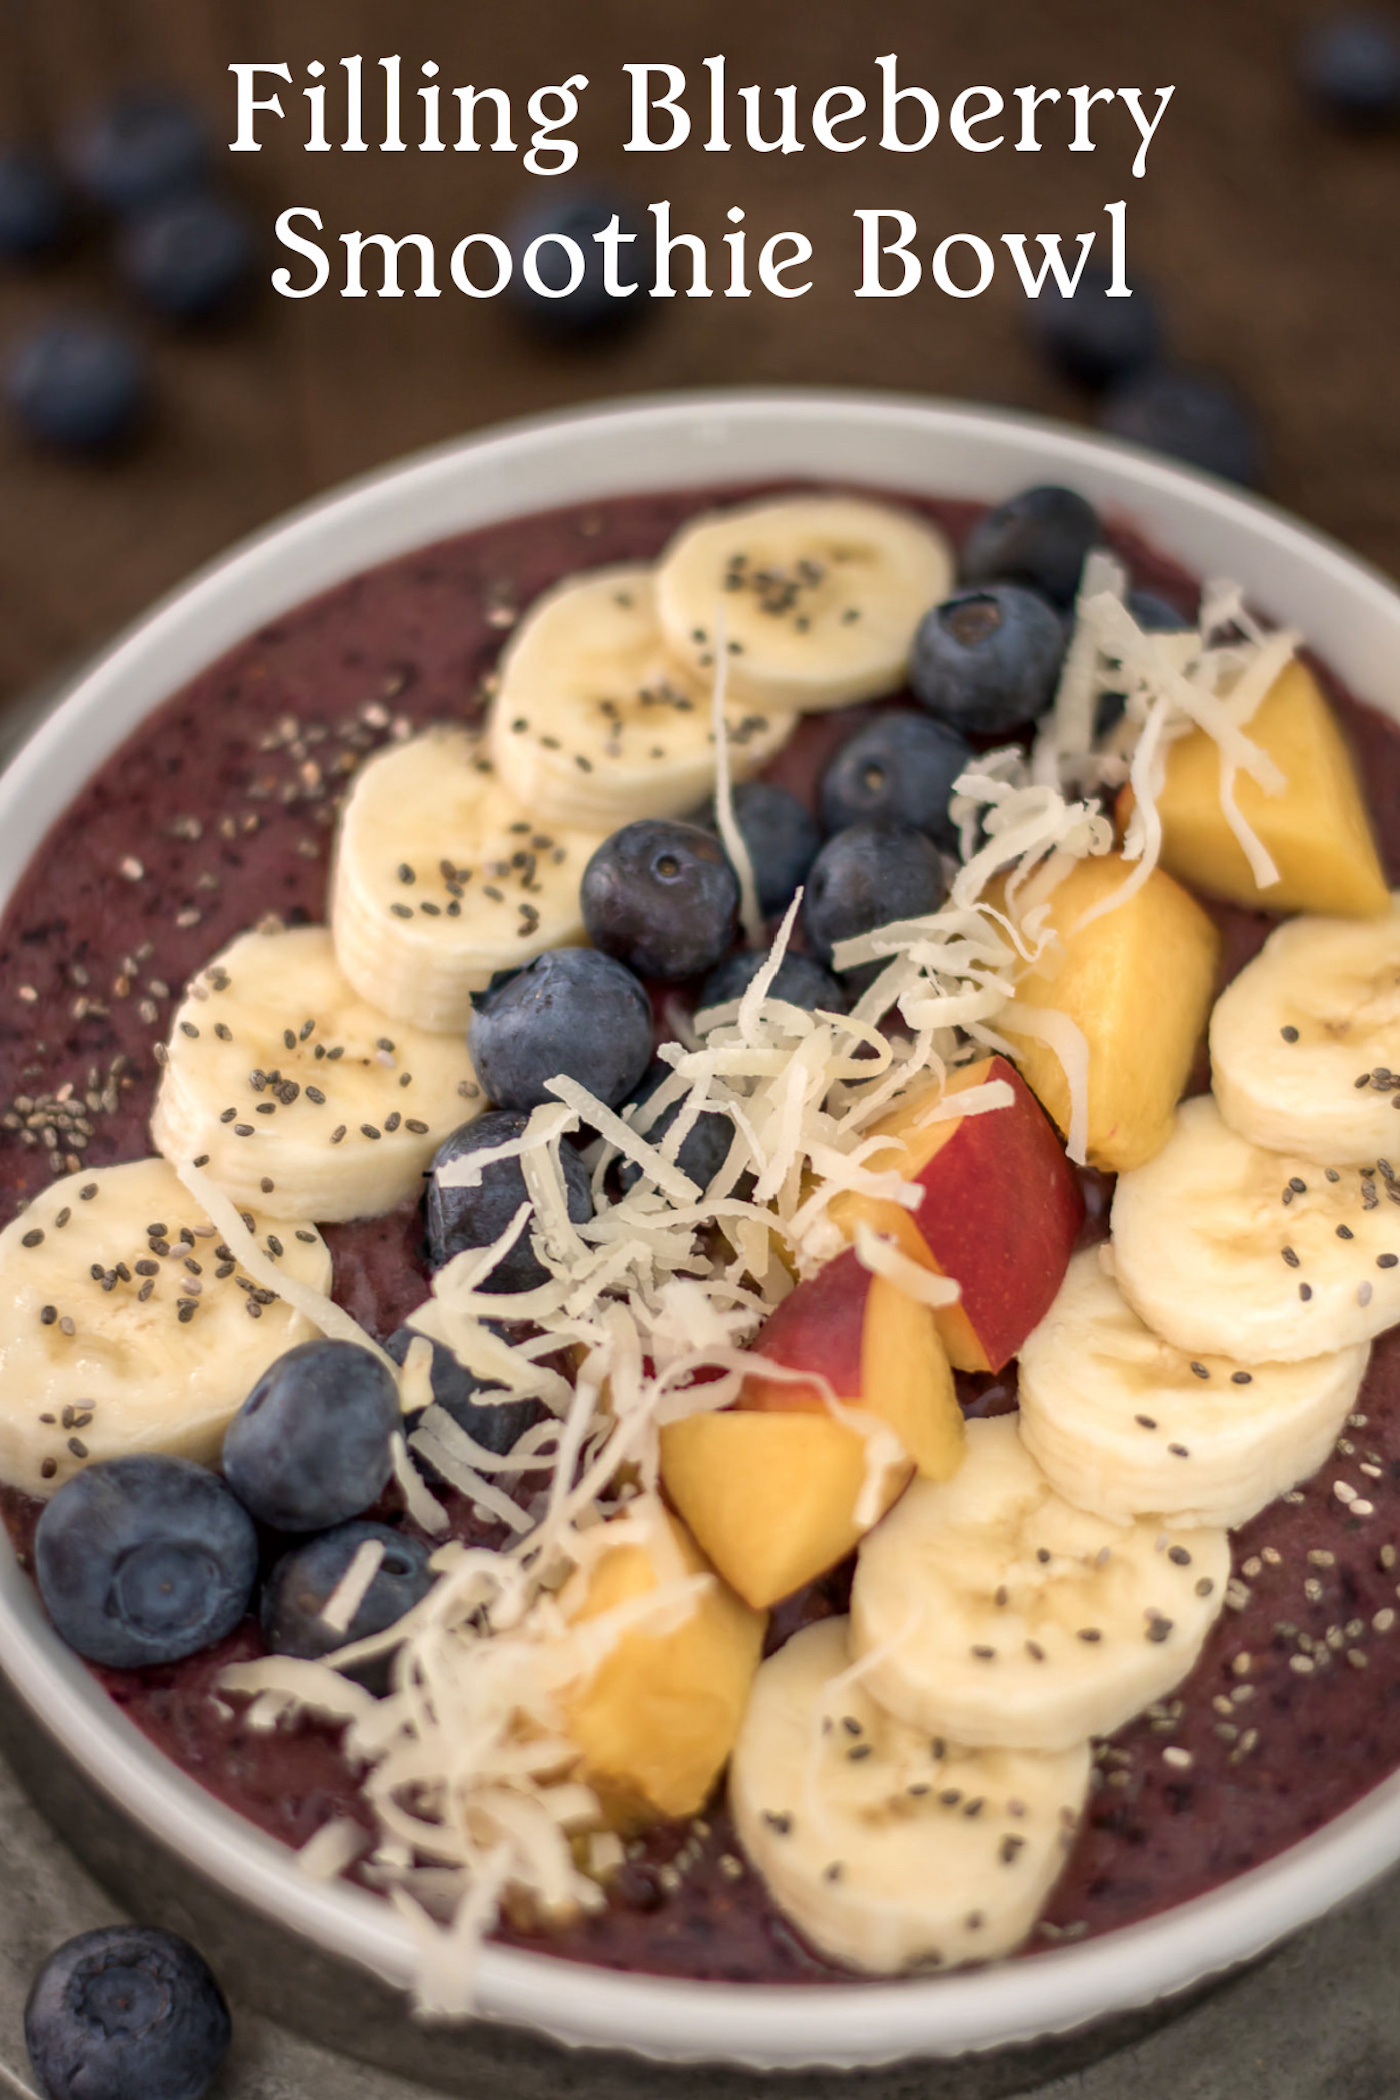 Filling Blueberry Smoothie Bowl